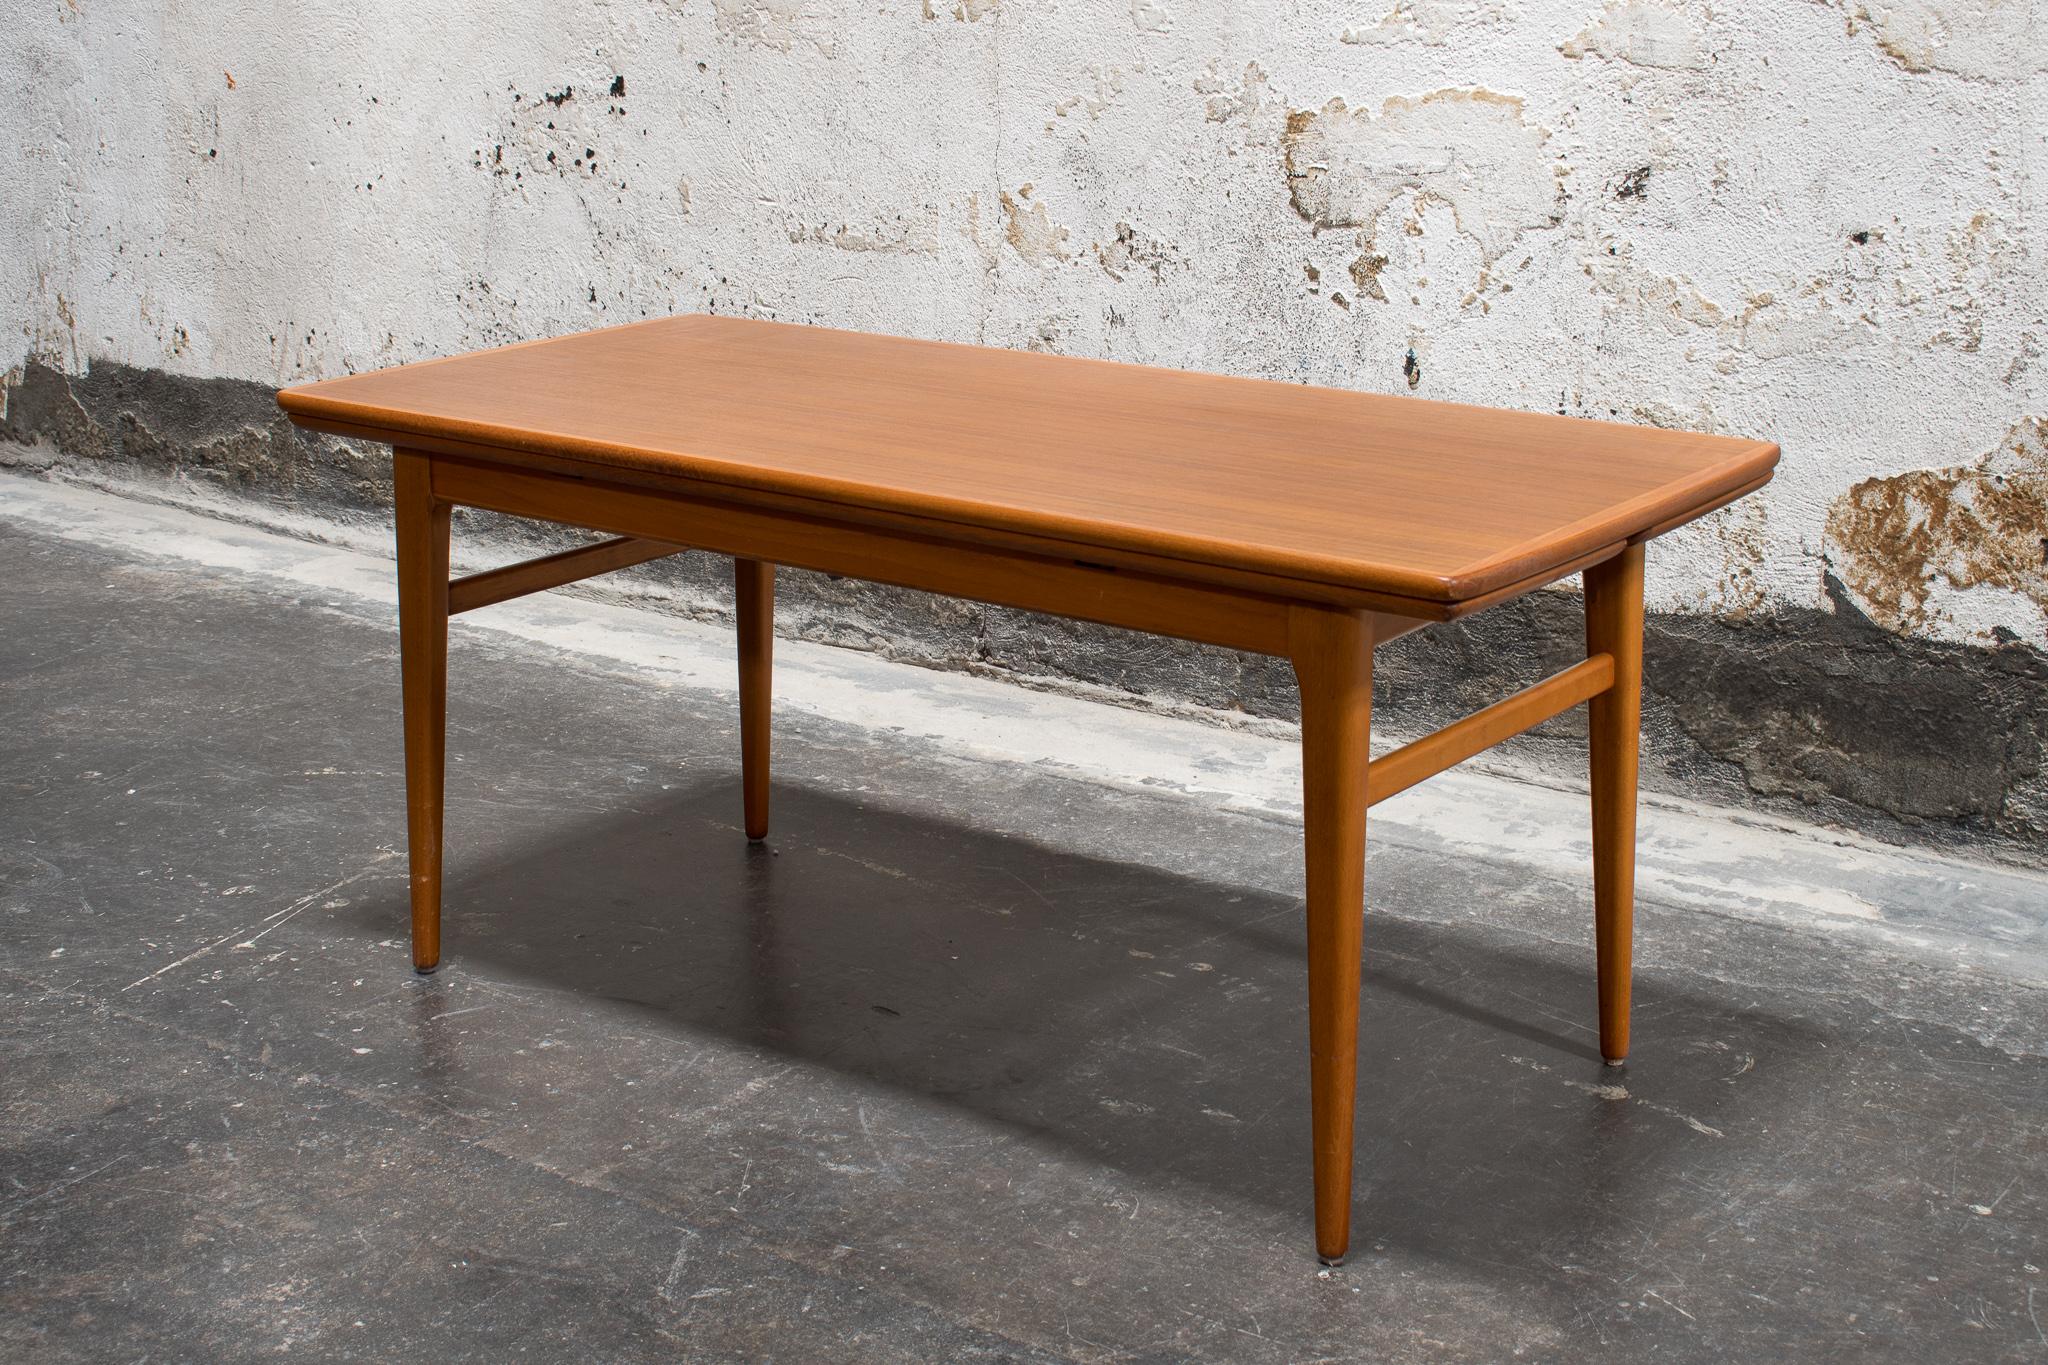 MCM Swedish table in Teak, 1960s. This clever coffee table converts to a game/dining table with an easy-to-use expandable function. Leaves can be pulled out both at coffee table and game table height. This would be a great table for smaller spaces